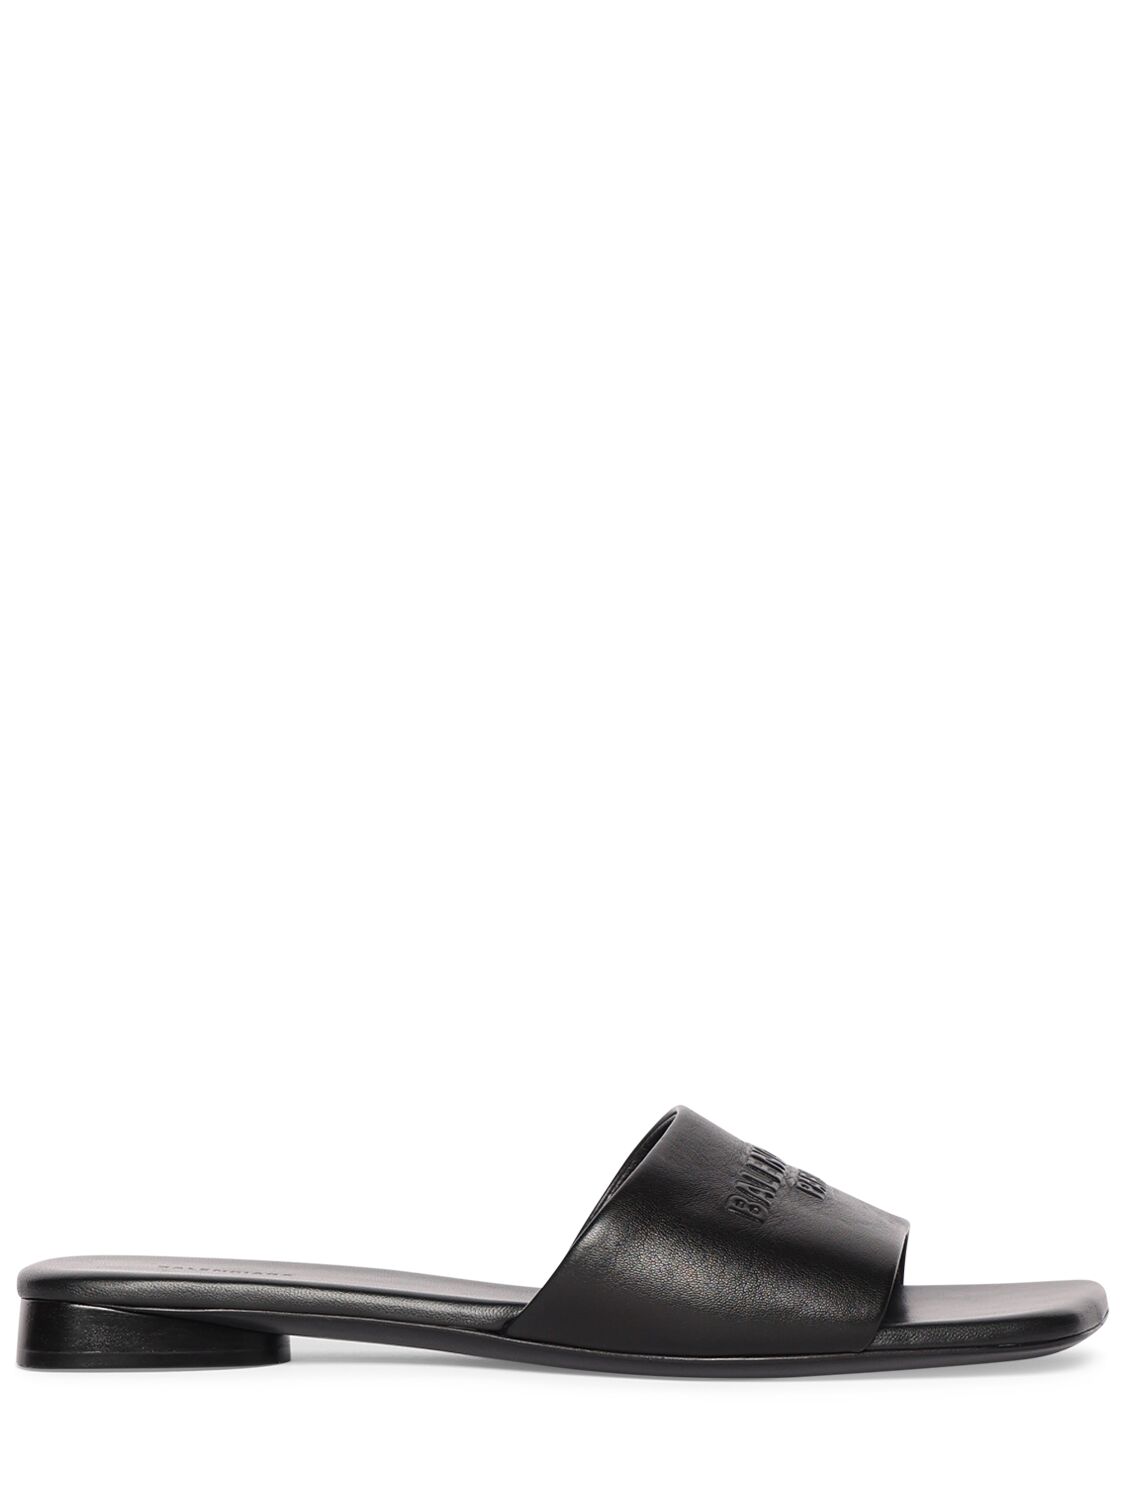 10mm Dutyfree Shiny Leather Sandals